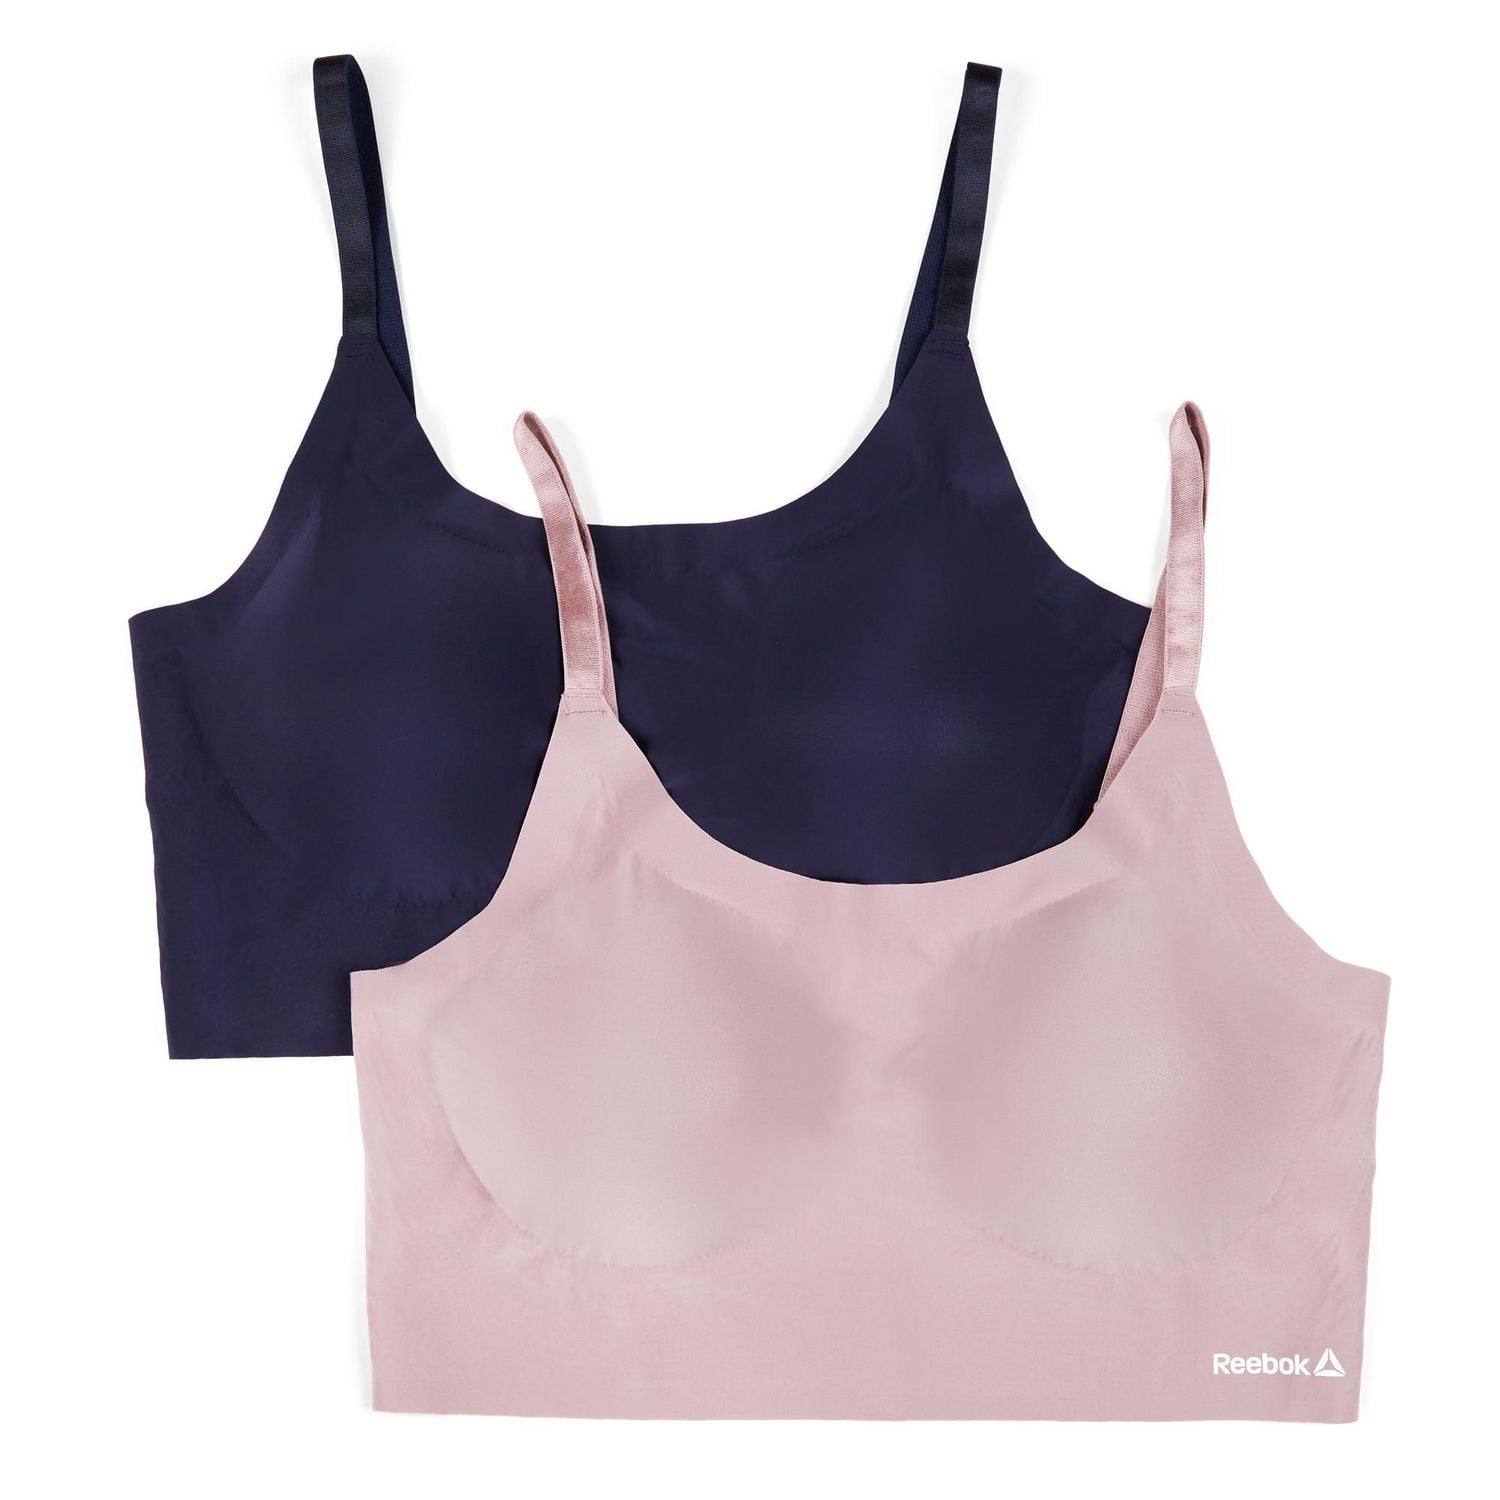 Last Chance Sale $25 - $50 Staying Dry Sports Bras.